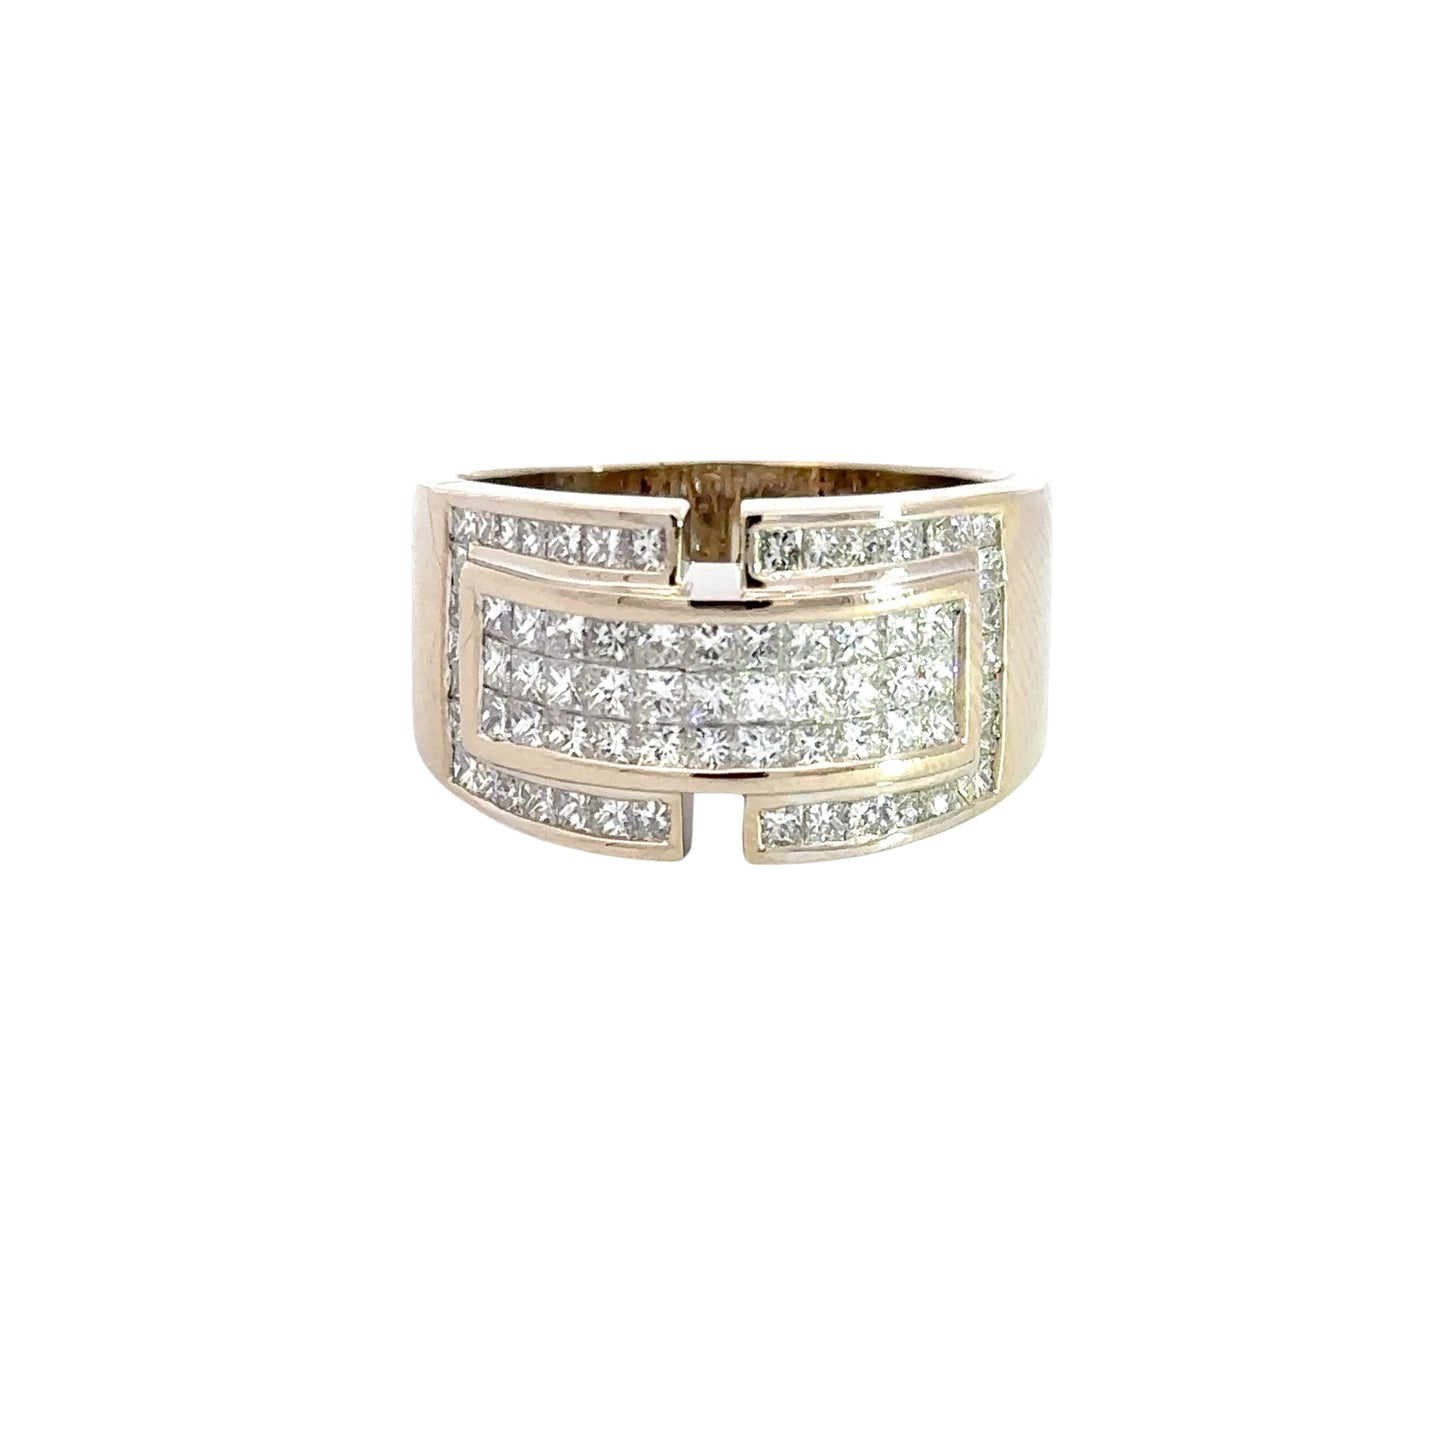 Front of ring with 3 rows of 11 princess-cut diamonds in the center and priness-cut diamonds on the side